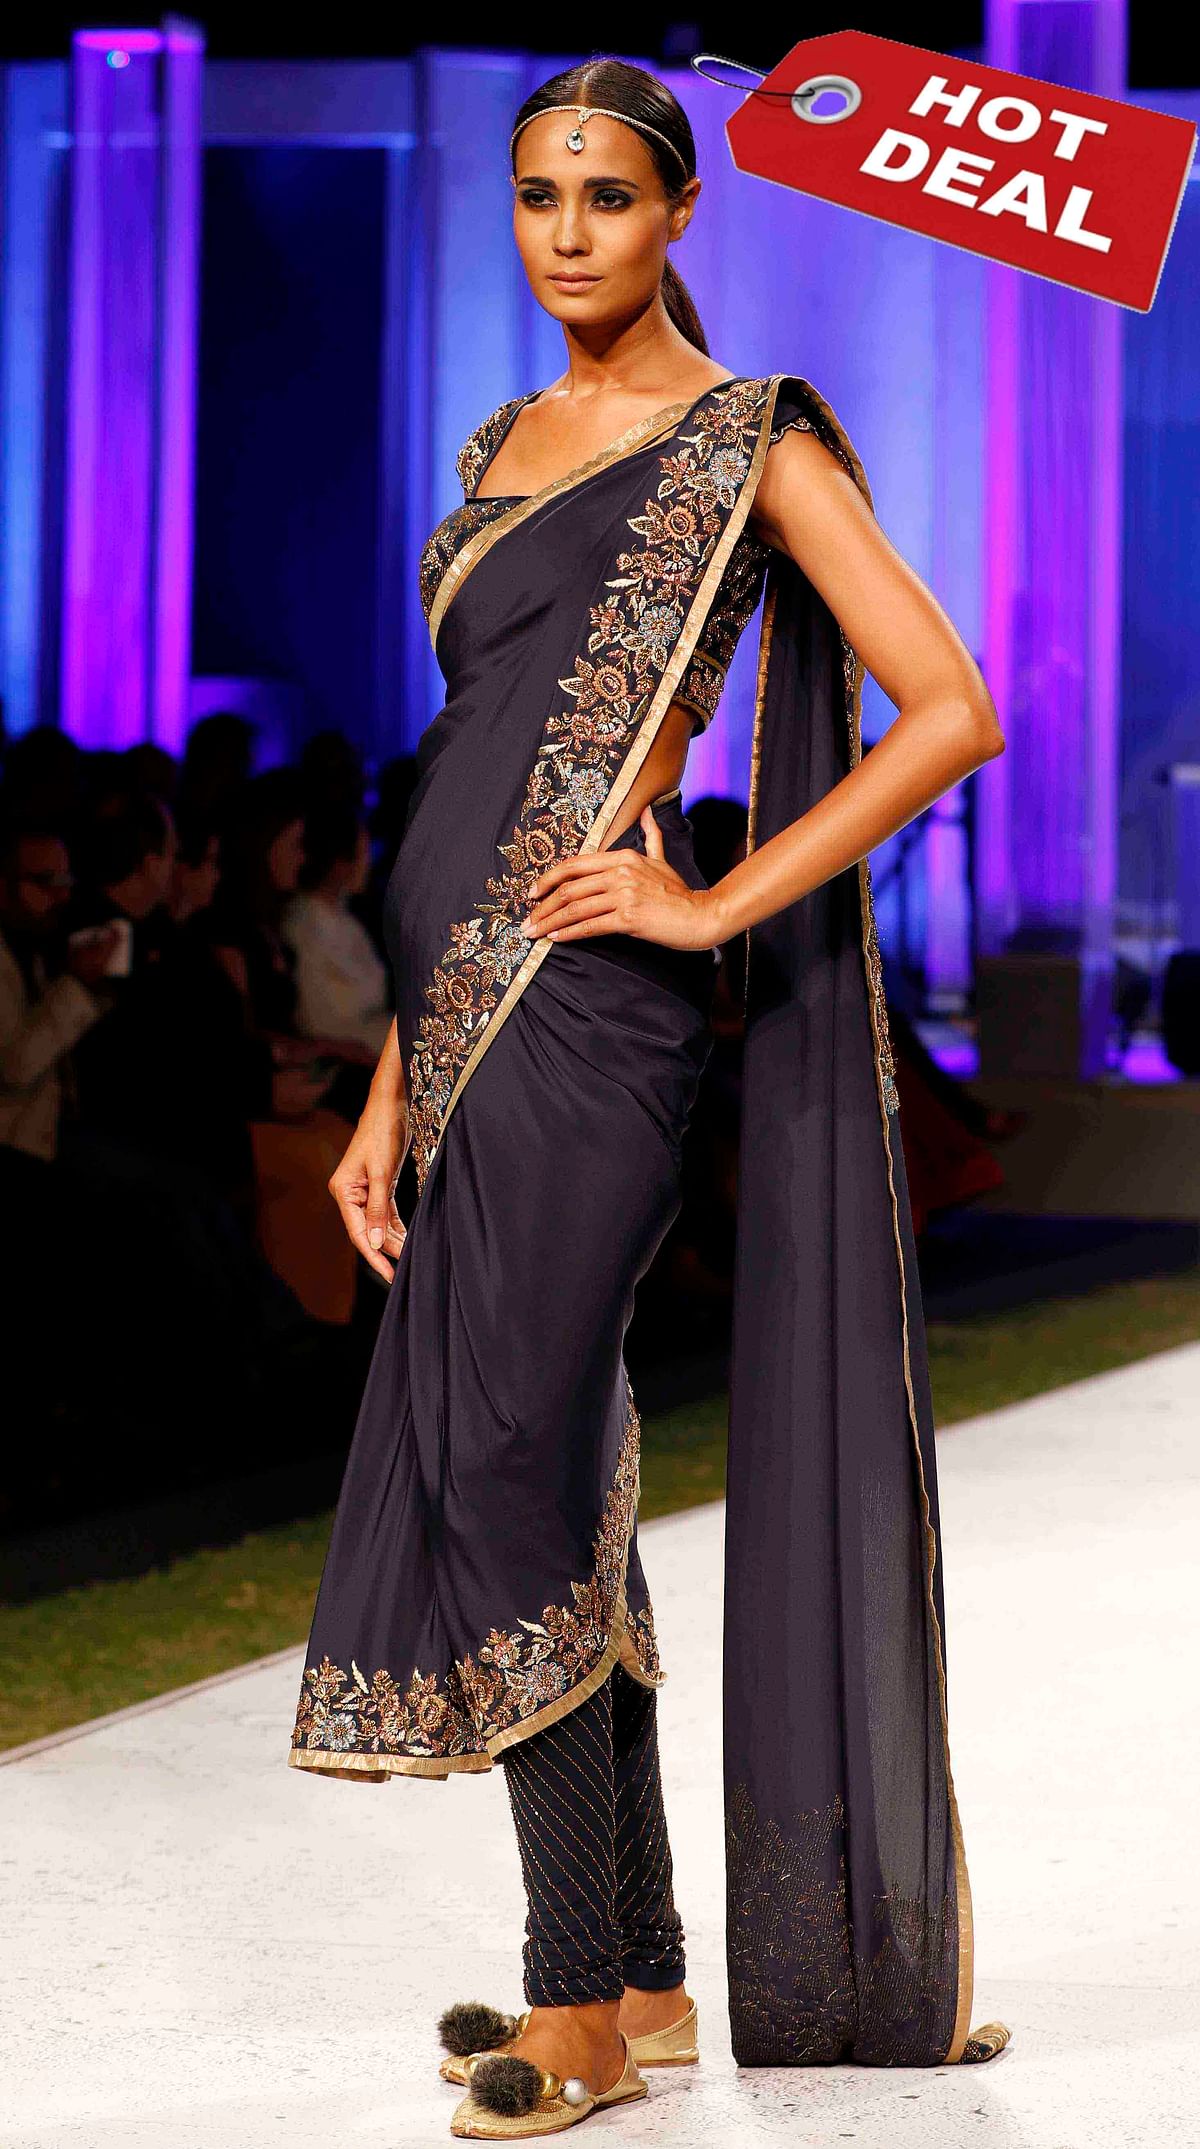 As designers Rahul Mishra and JJ Valaya showcased their collections at a fashion tour, Sonakshi rocked the catwalk.